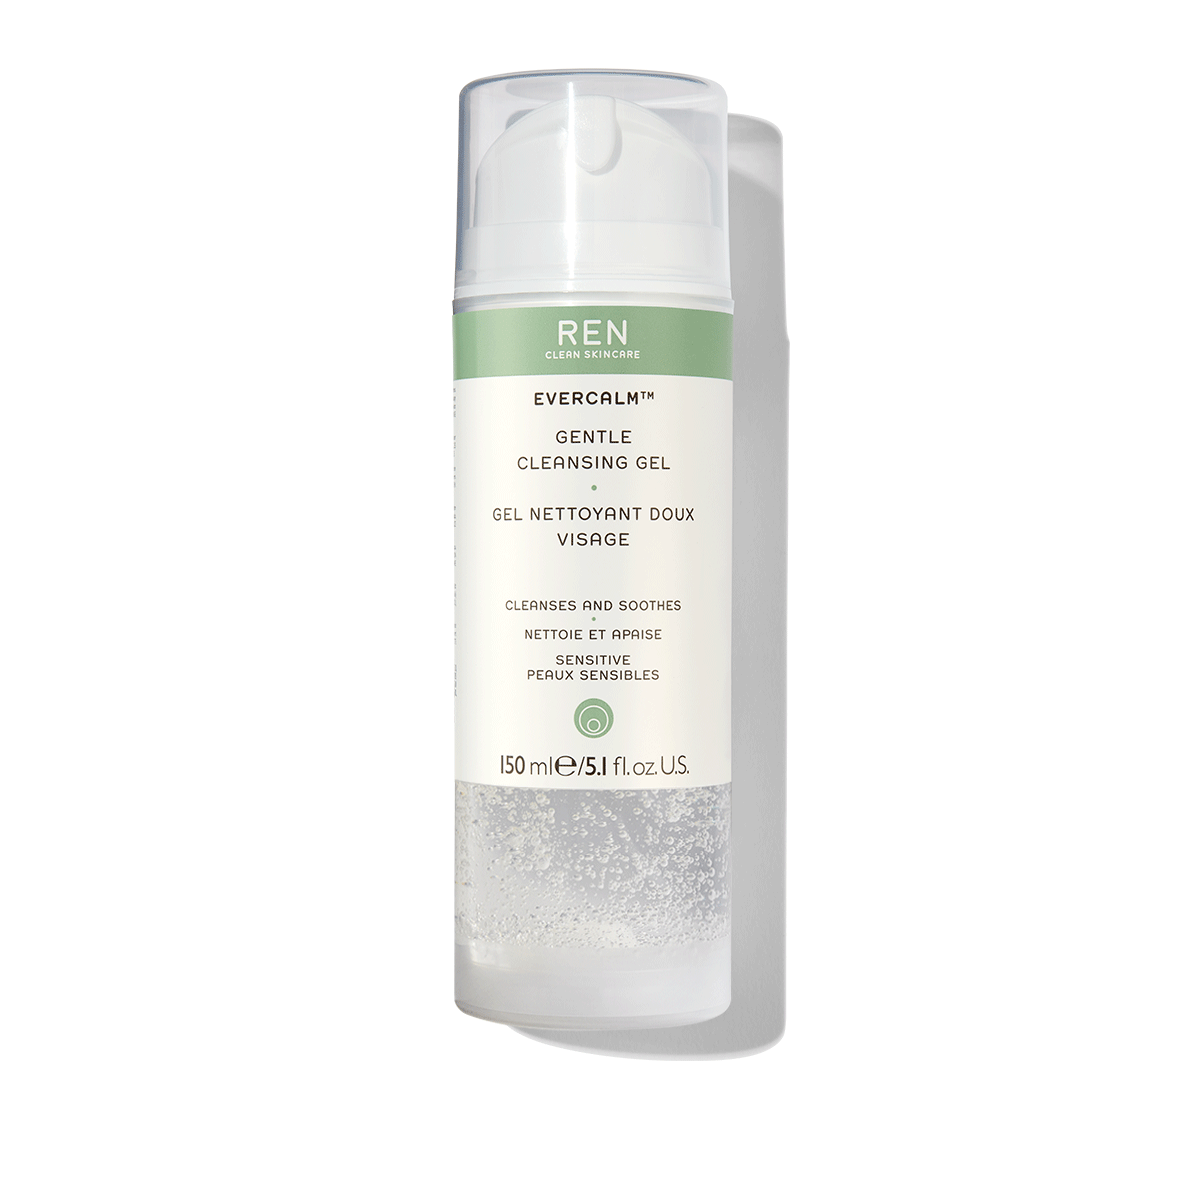 REN Clean Skincare - Evercalm Gentle Cleansing Milk - Natural, Gentle Cleanser for Sensitive Skin - Makeup Melting Cleanser for Face and Neck, 5.1 Fl Oz